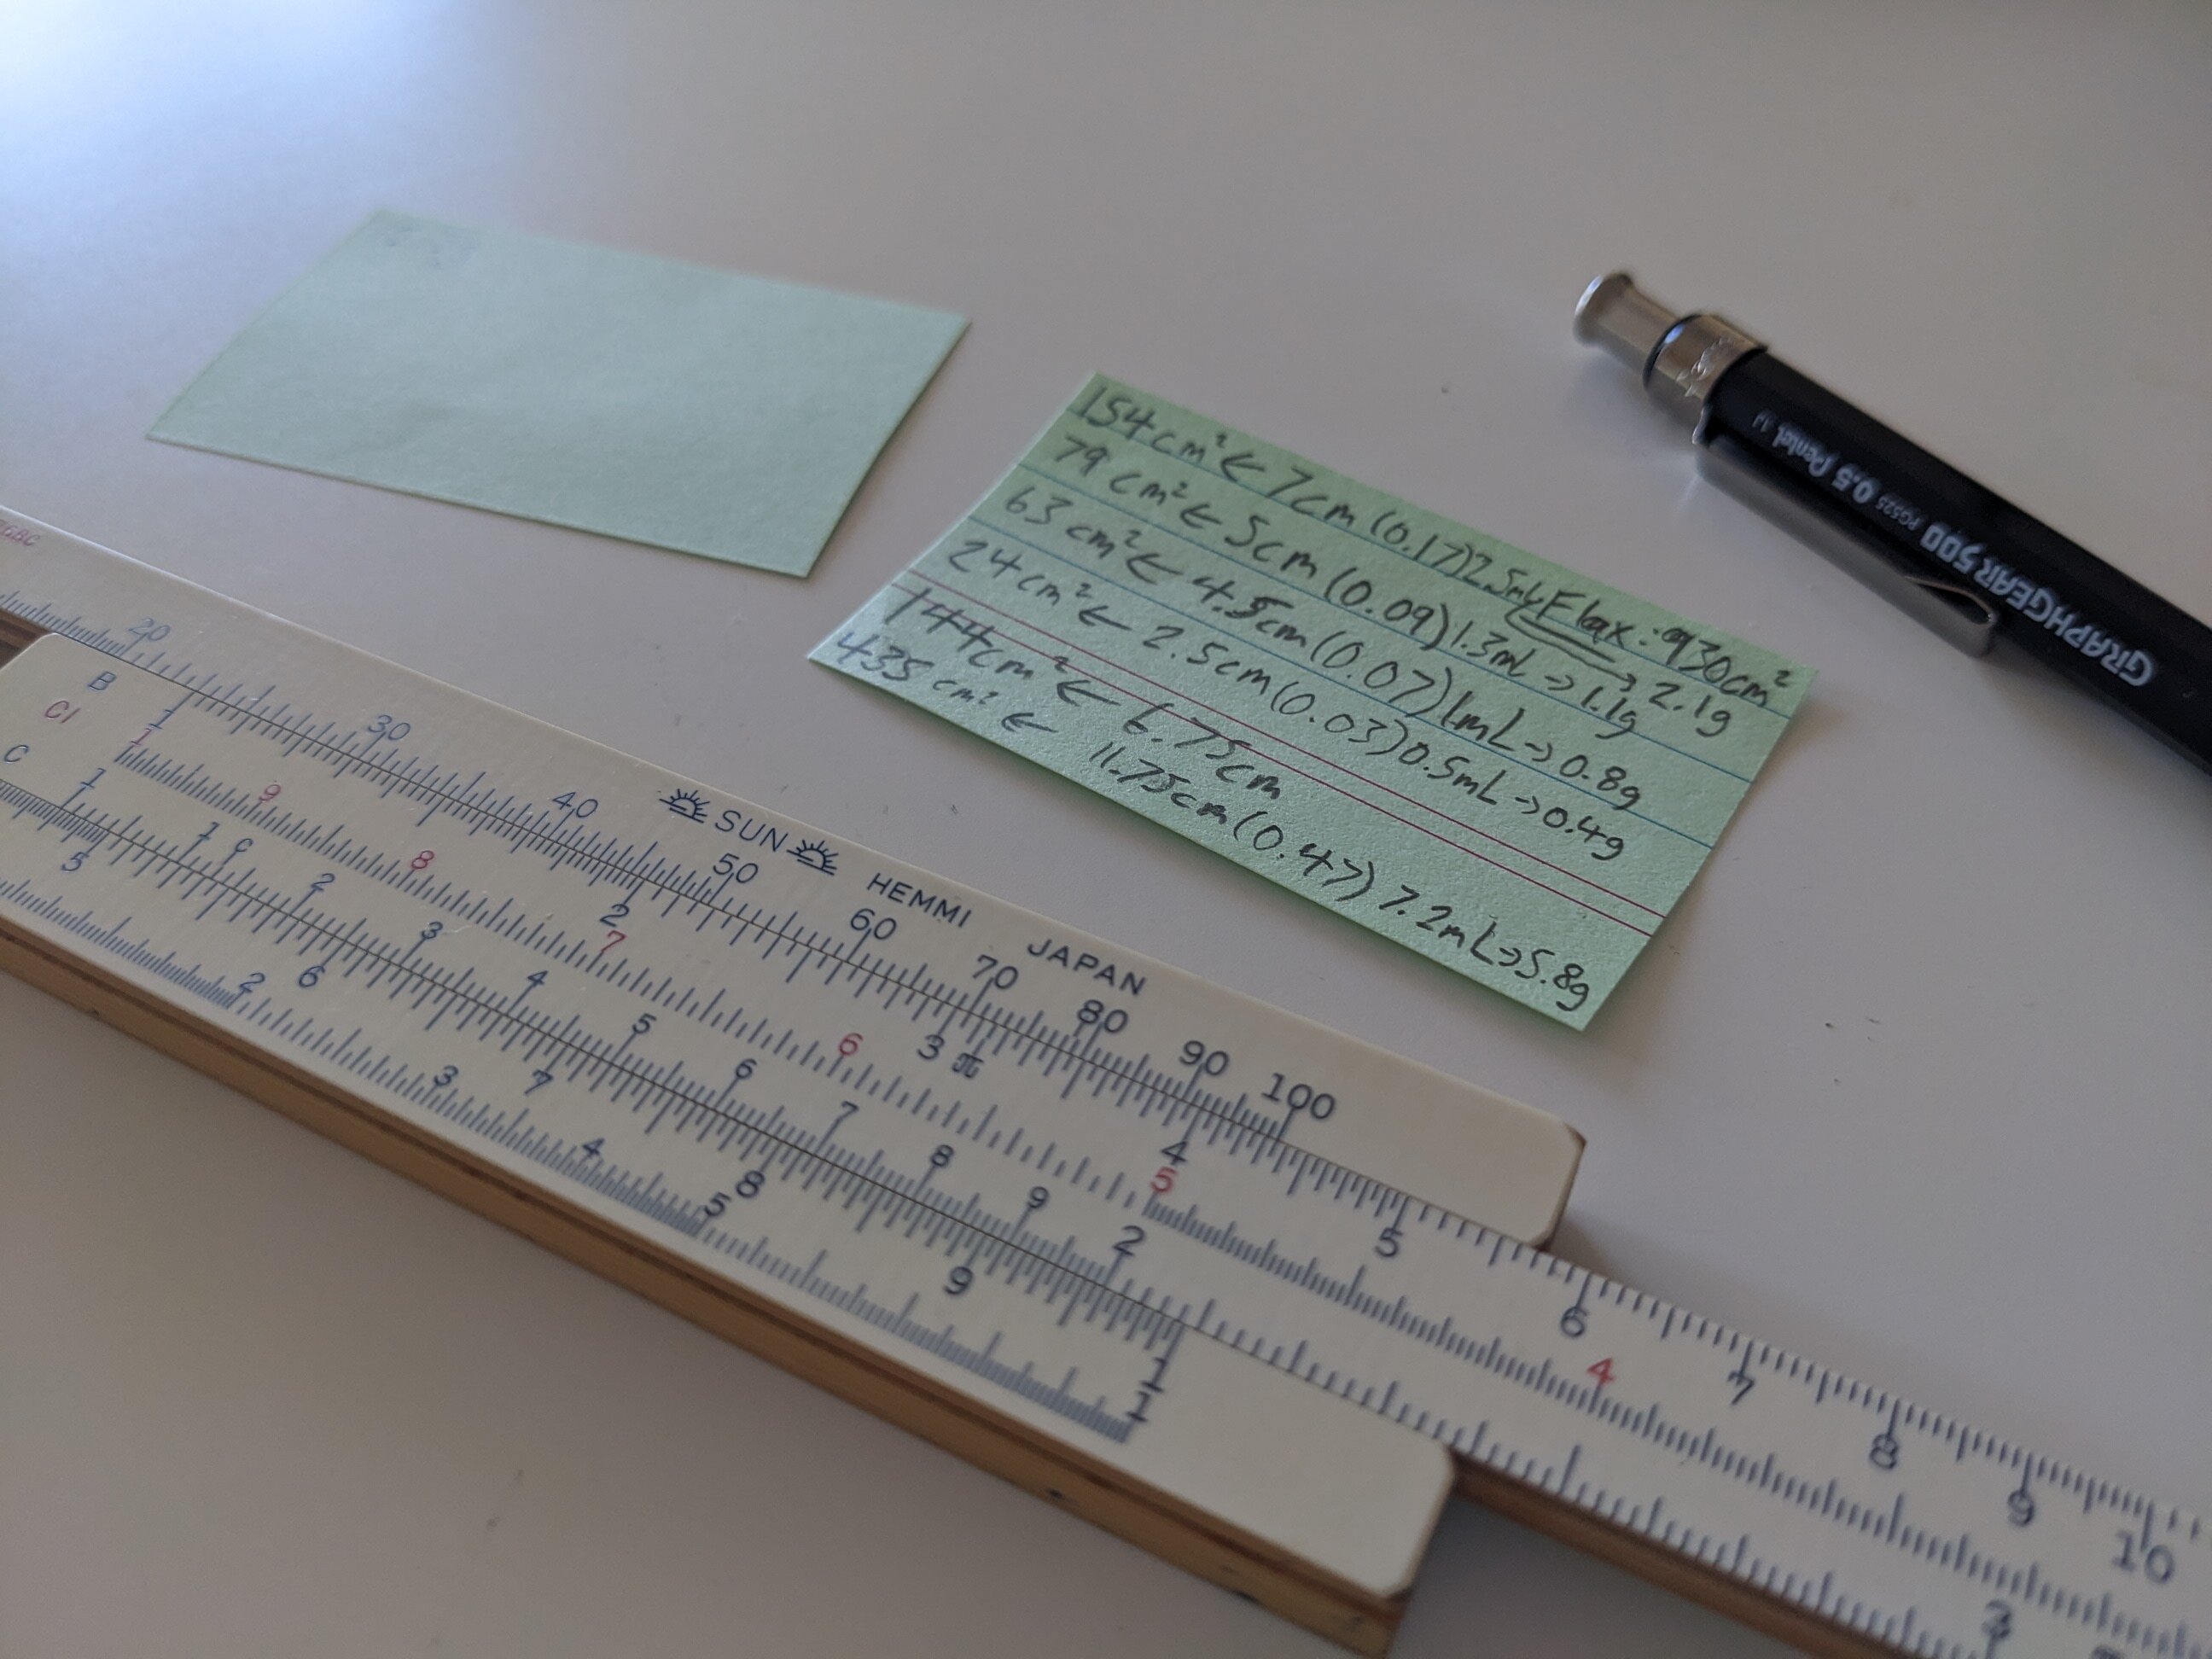 A slip of paper with calculations written on it, and a wooden slide rule.